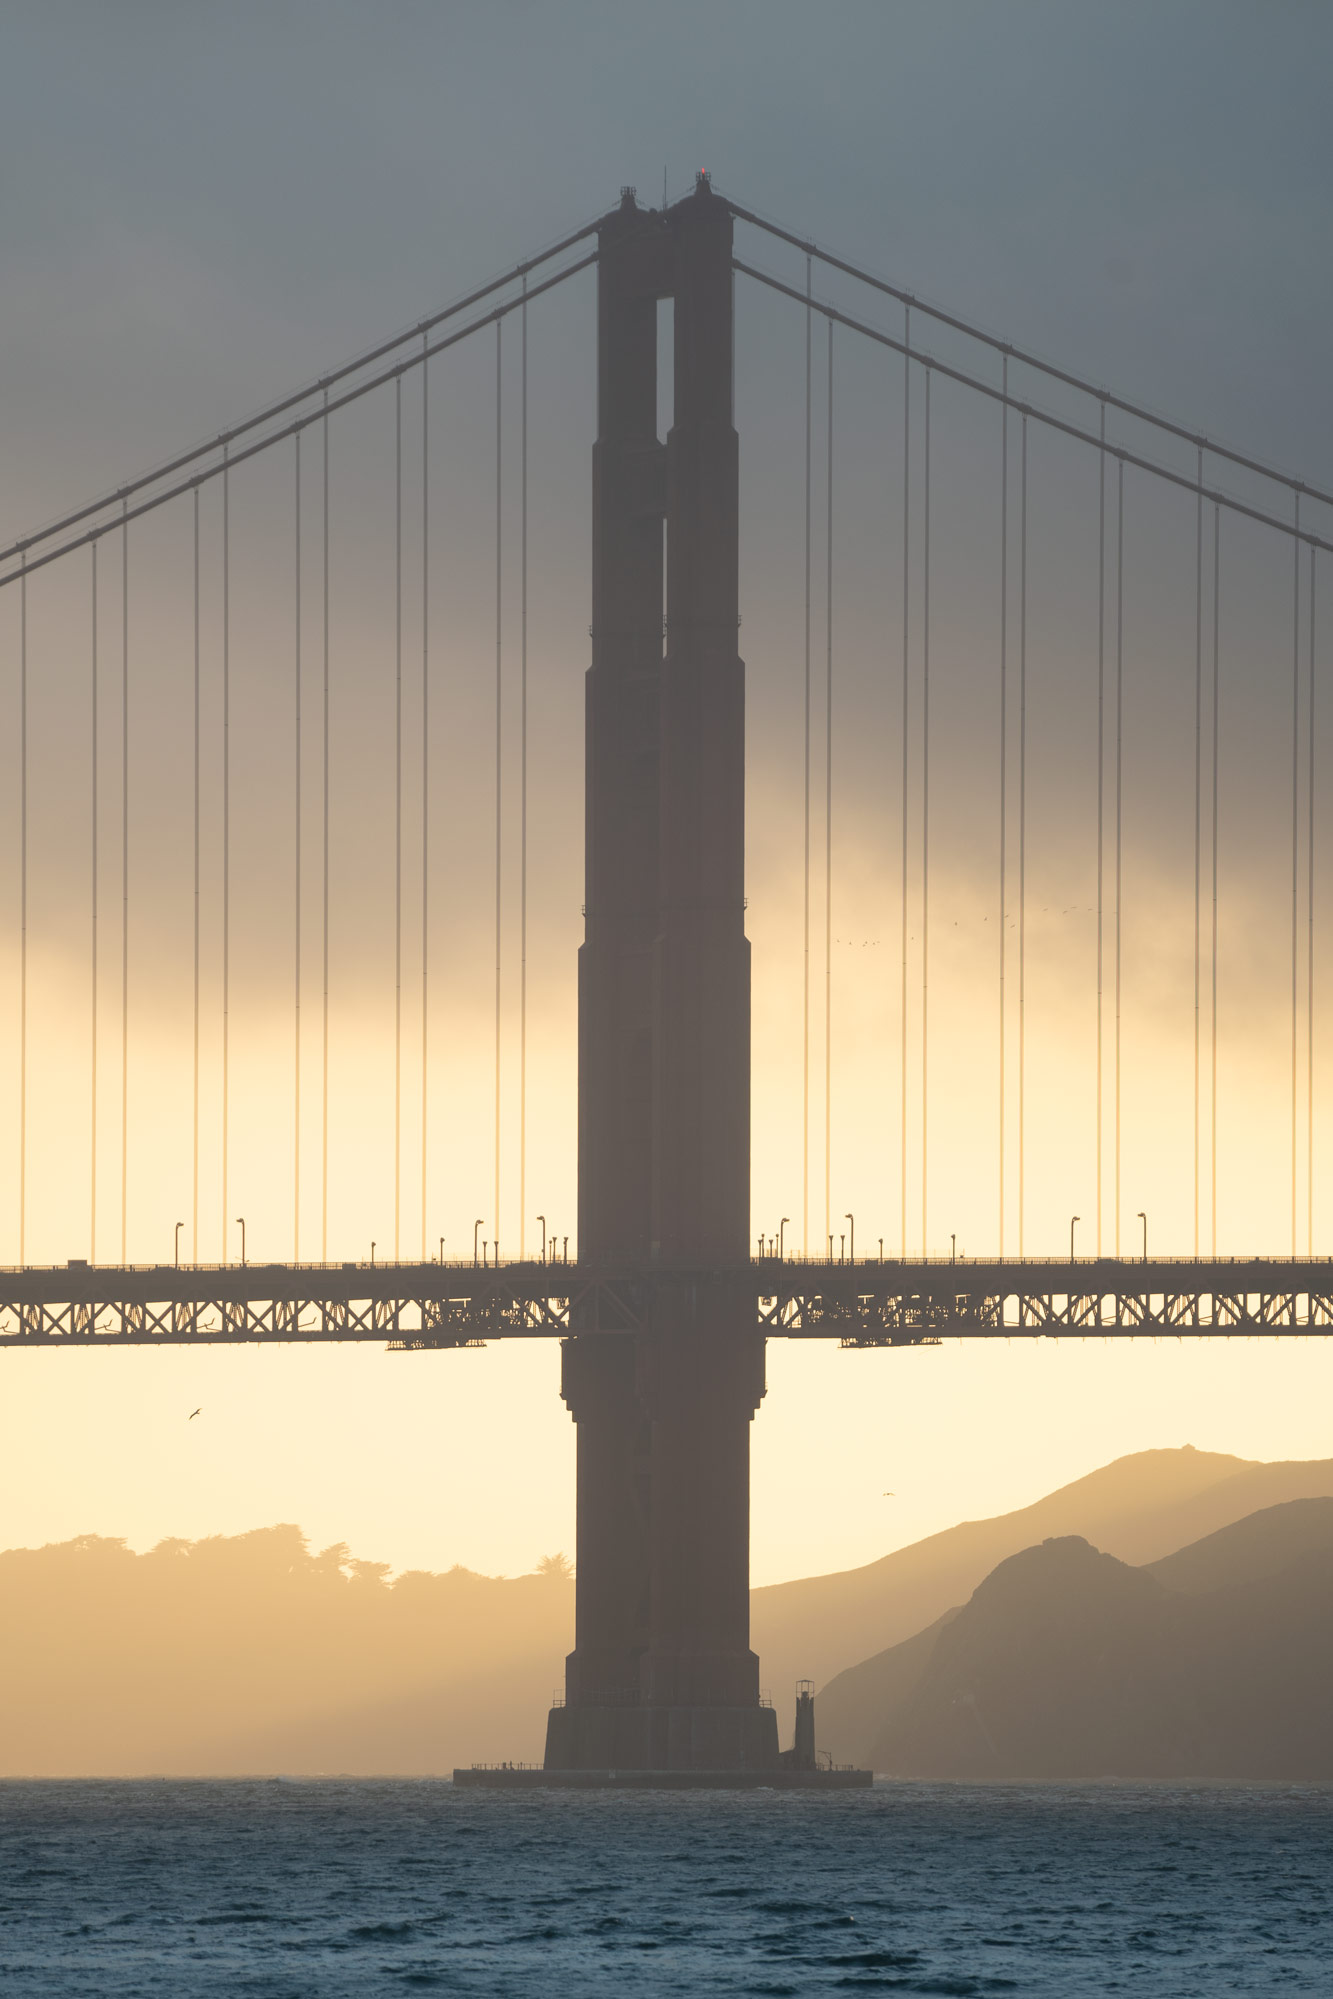 South tower of the Golden Gate Bridge during a foggy sunset